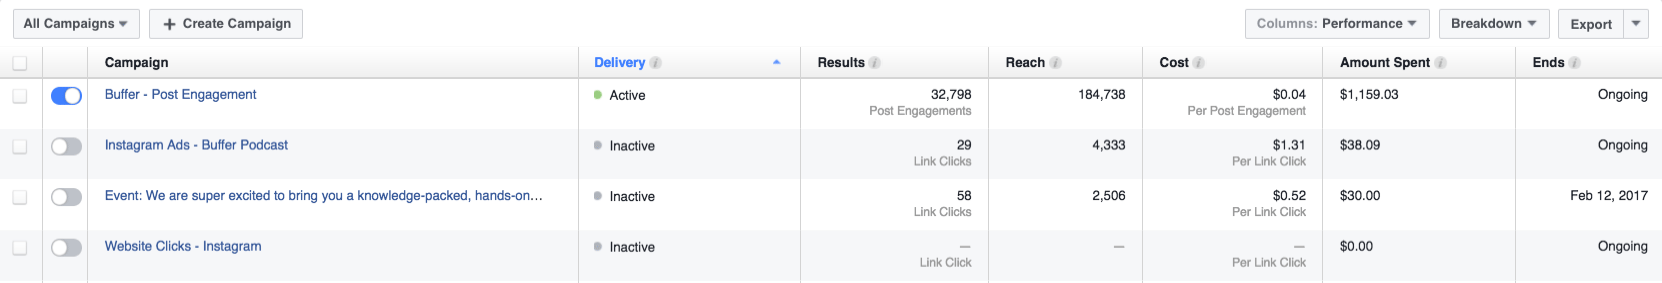 Facebook ads manager reporting table